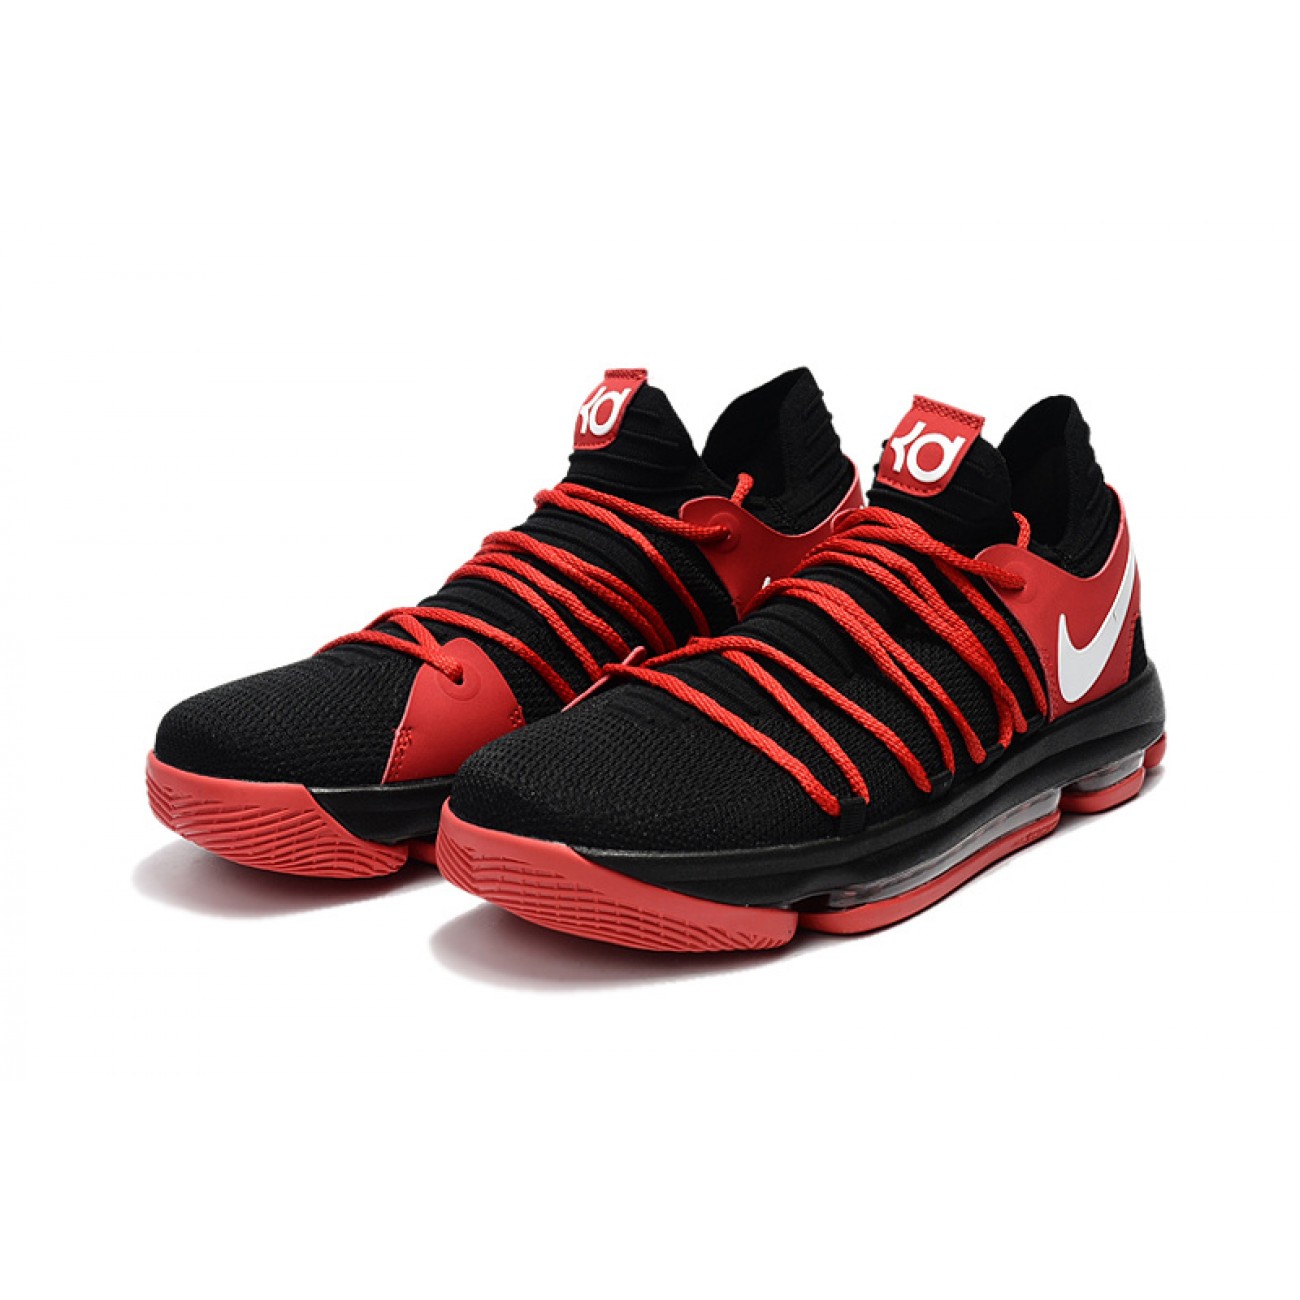 Kevin Durant KD10 Black/Red/White